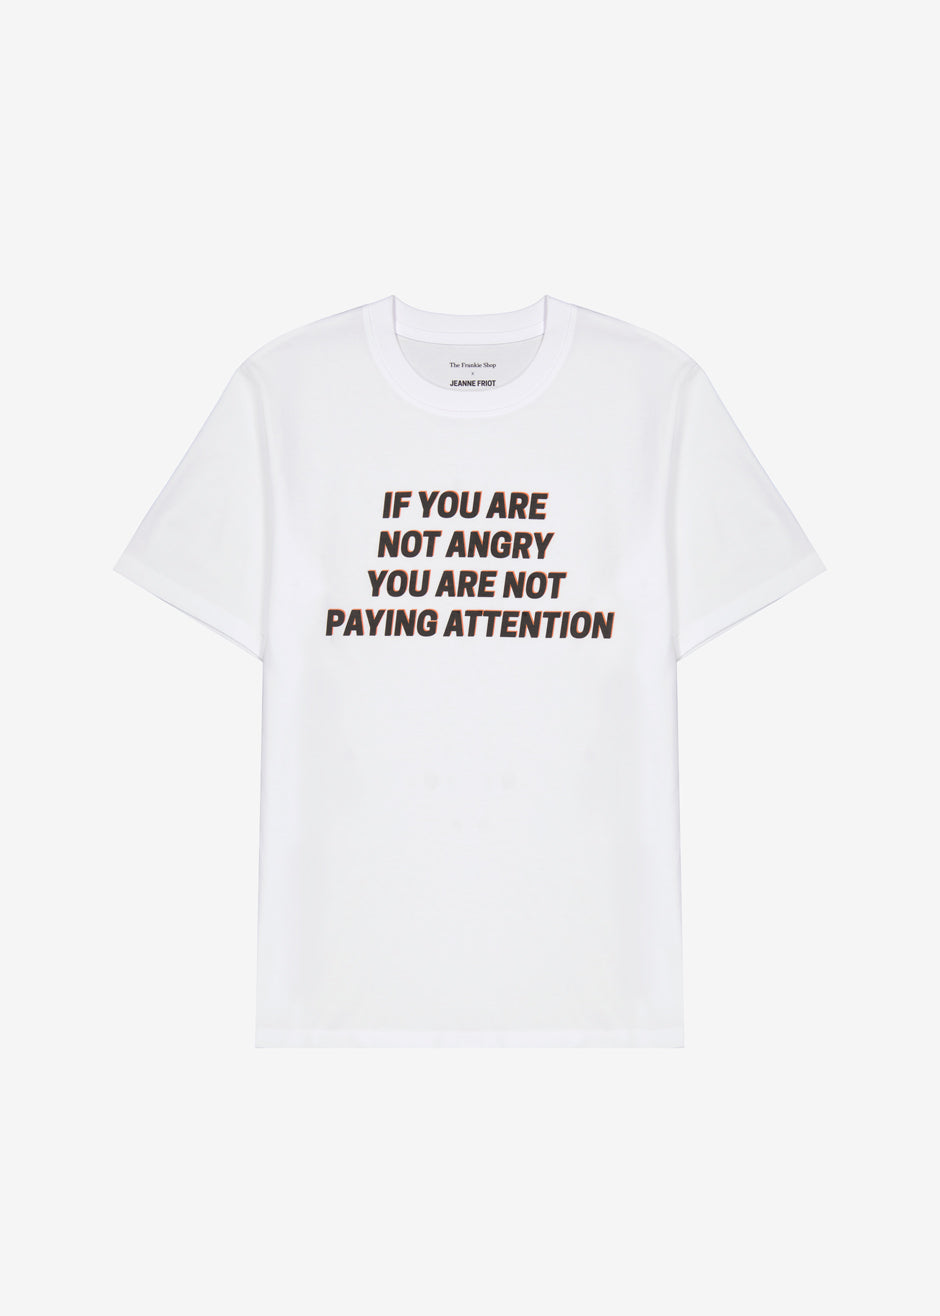 The Frankie Shop x Jeanne Friot If You T-Shirt - White/Black - 15